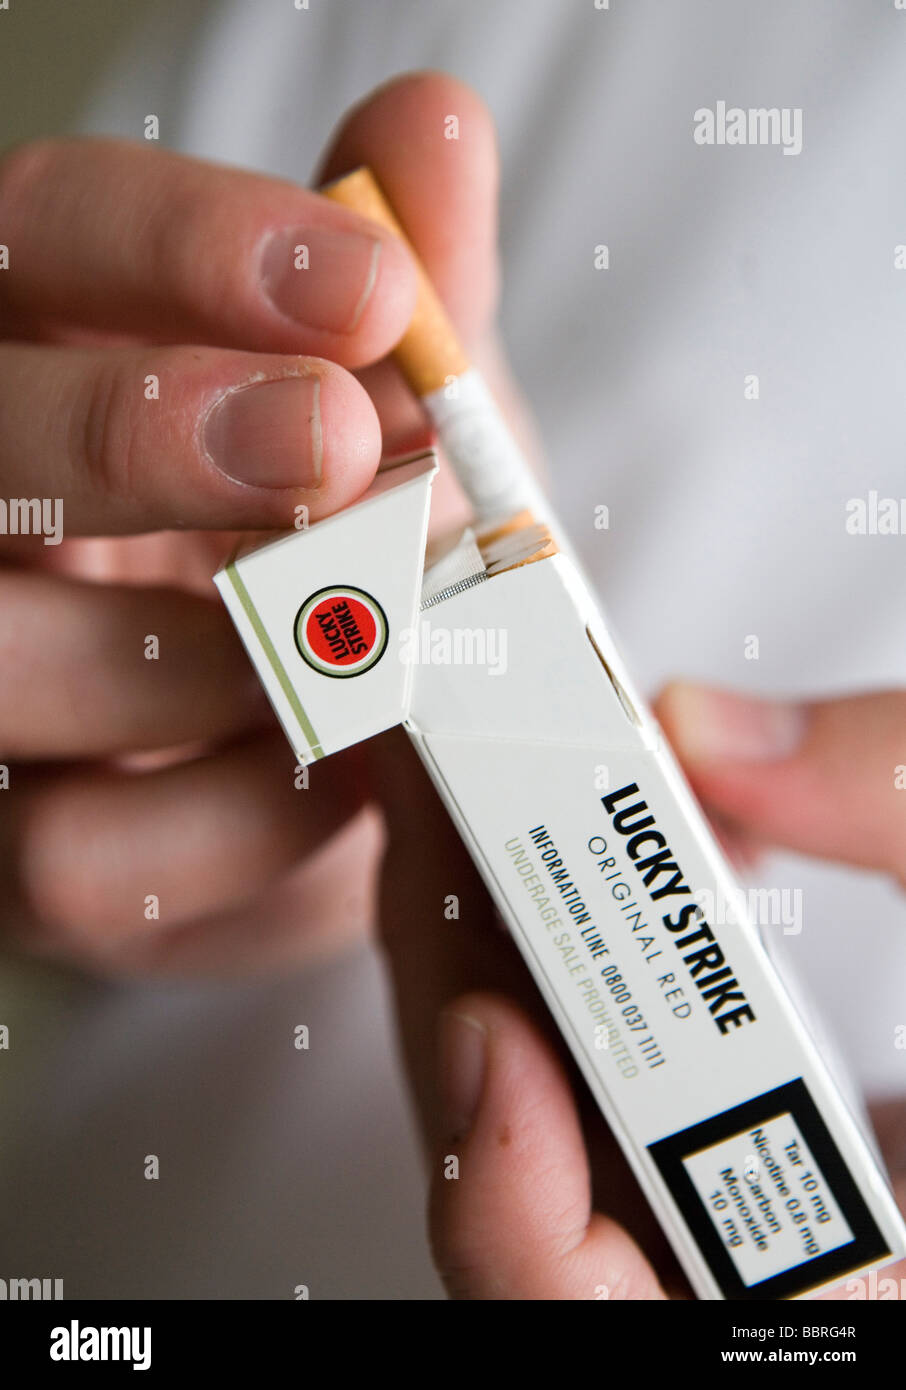 A smoker takes a Lucky Strike cigarette made by British American